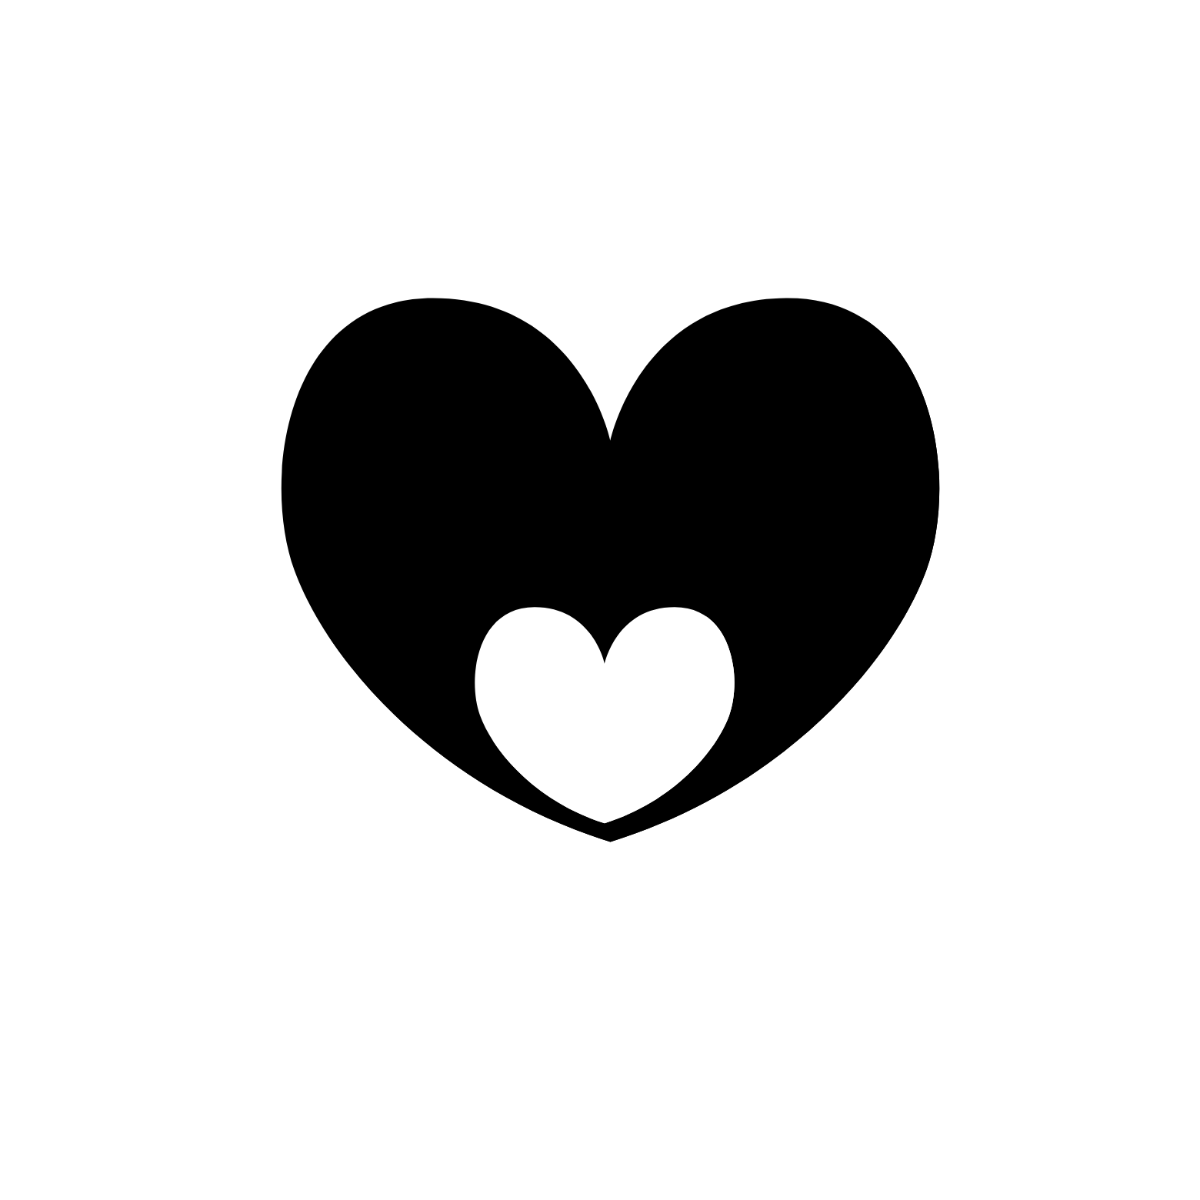 Free Black and White Heart Silhouette Template